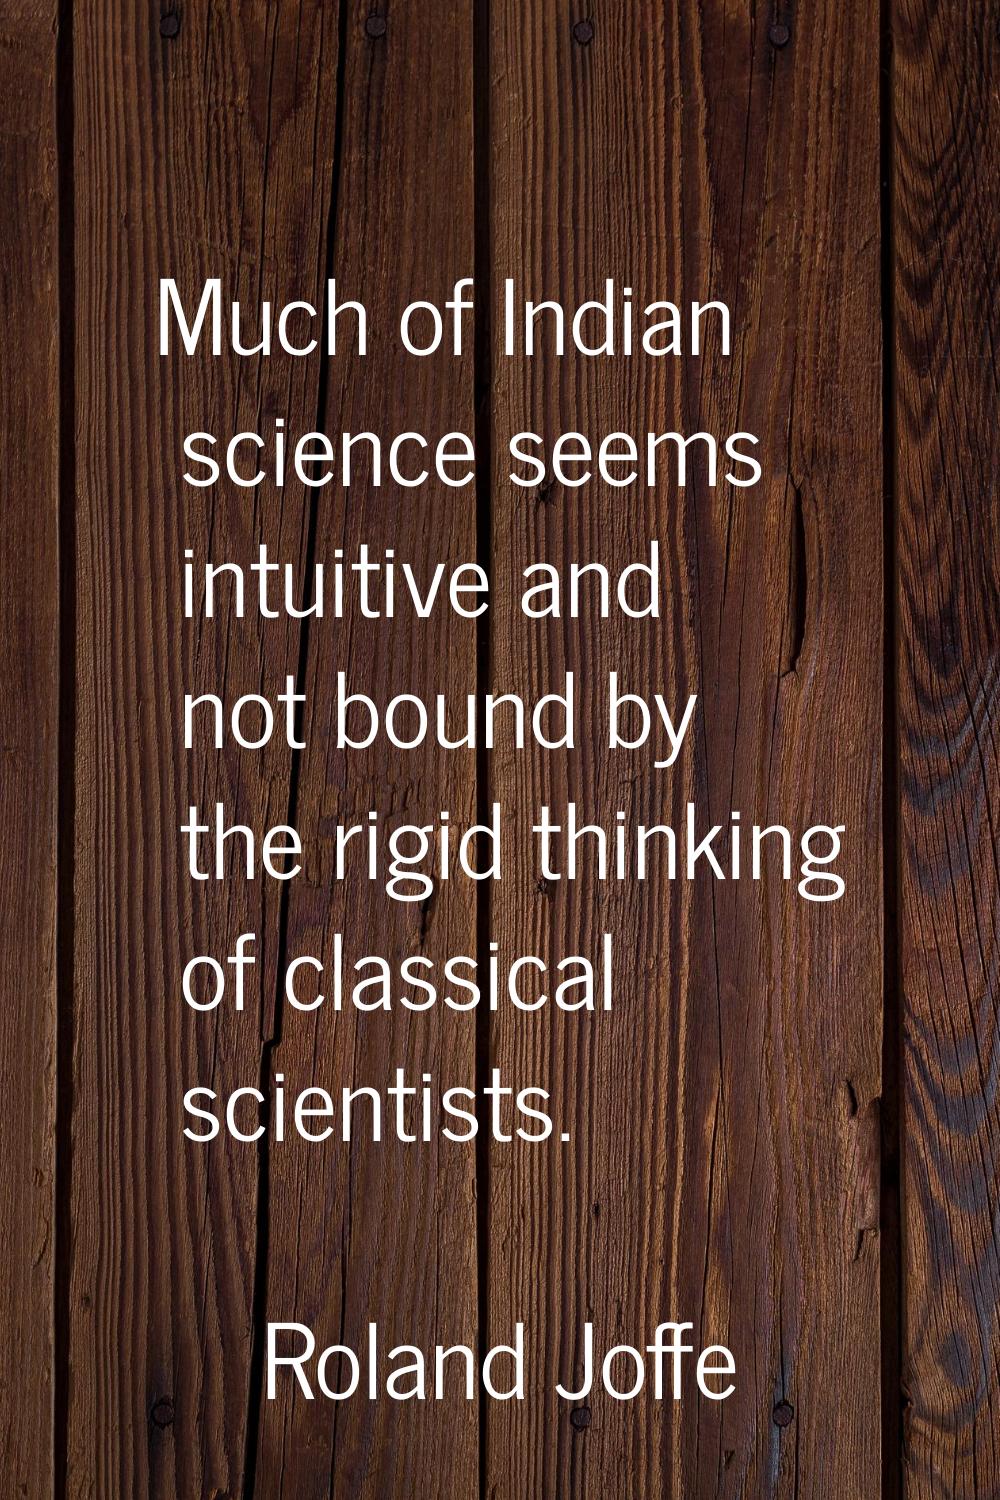 Much of Indian science seems intuitive and not bound by the rigid thinking of classical scientists.